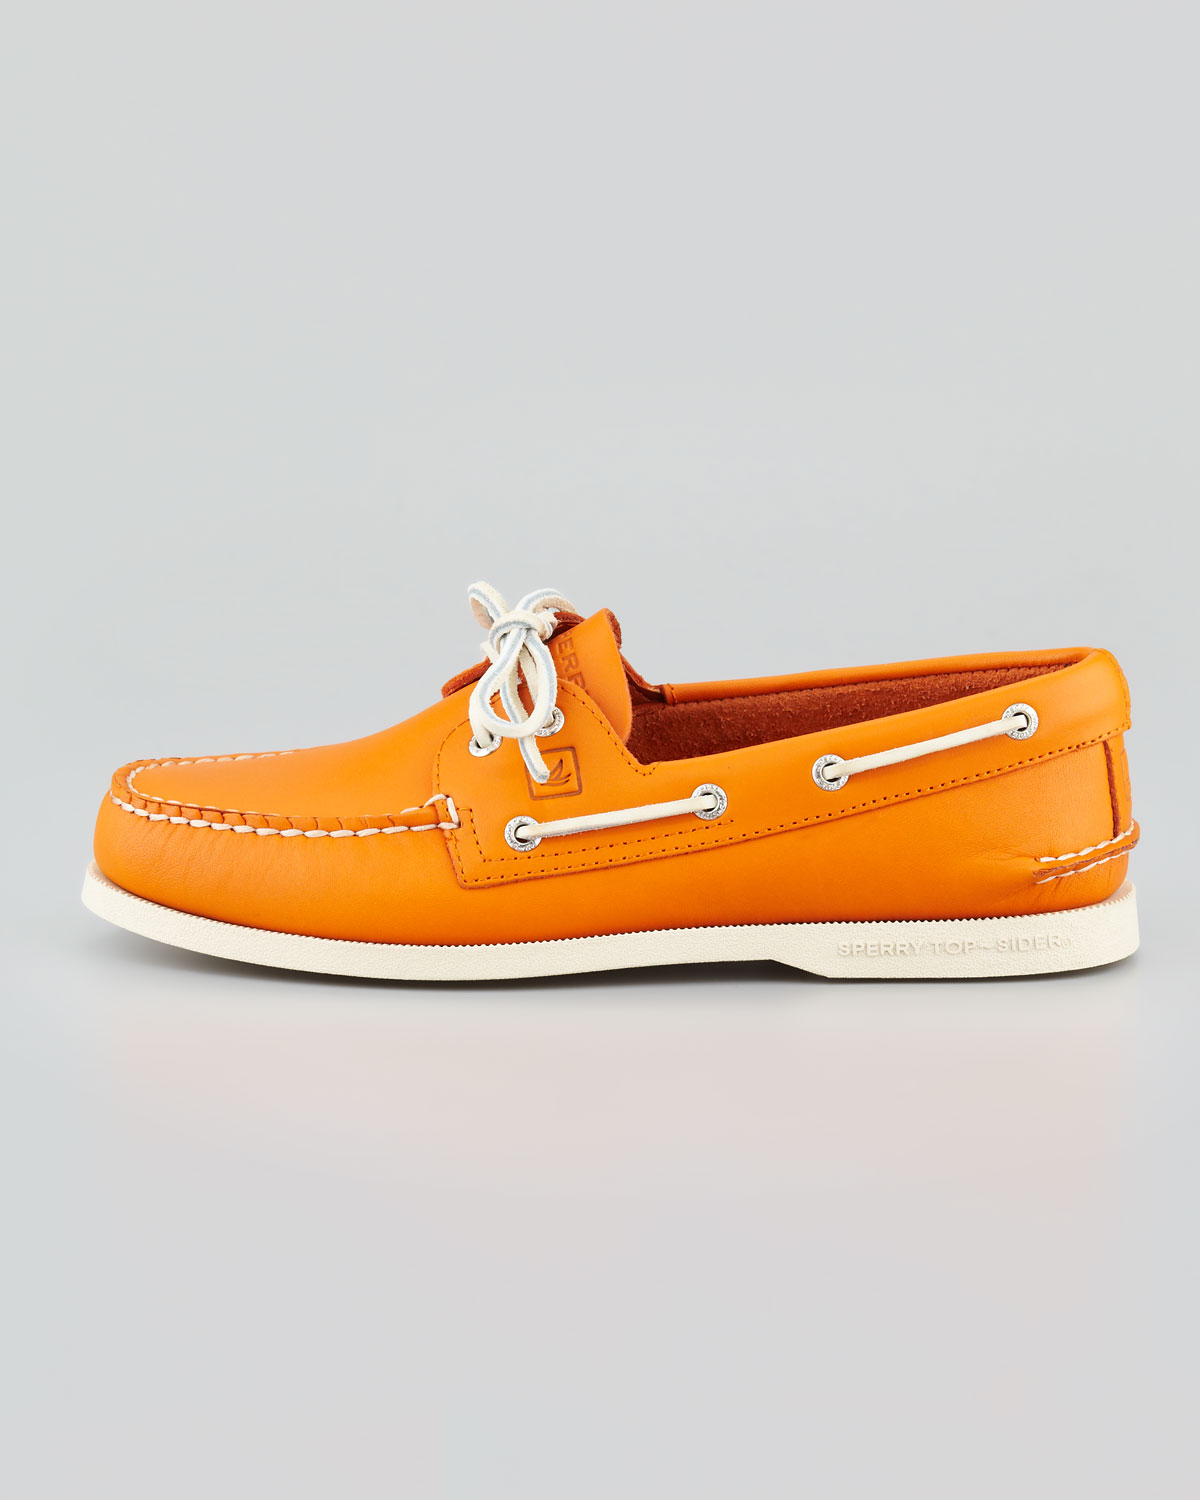 Sperry Top-Sider Authentic Original 